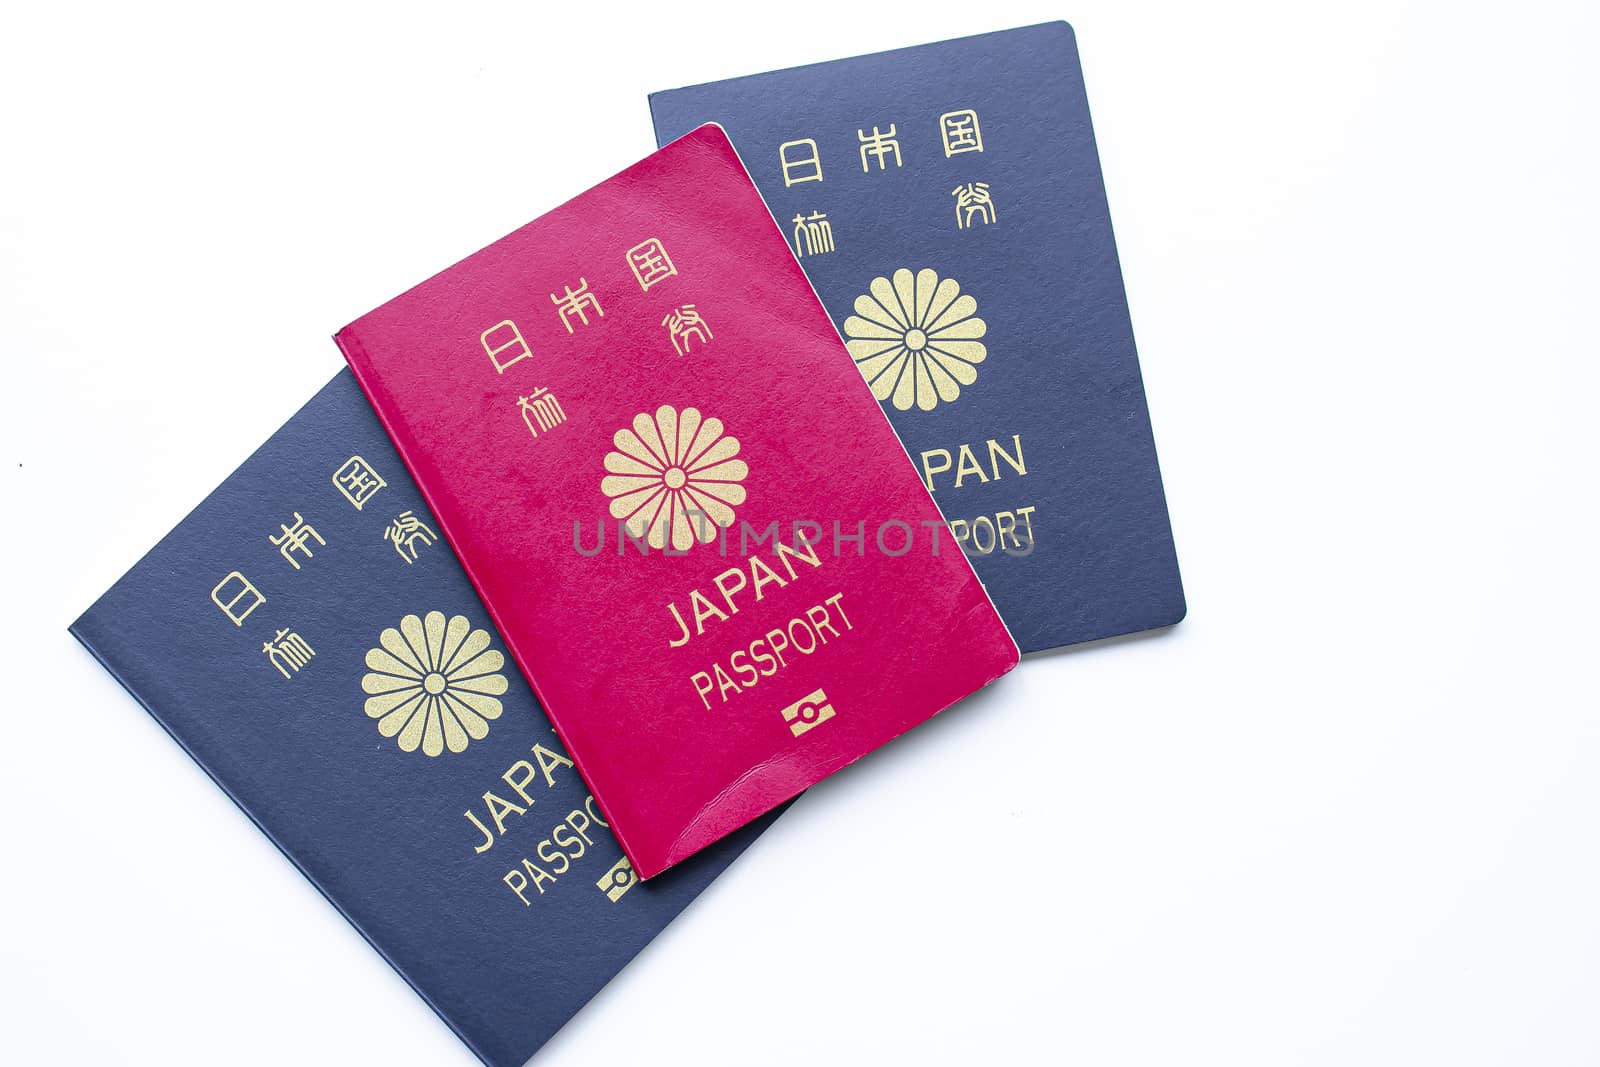 Japanese red and dark passports on a white background